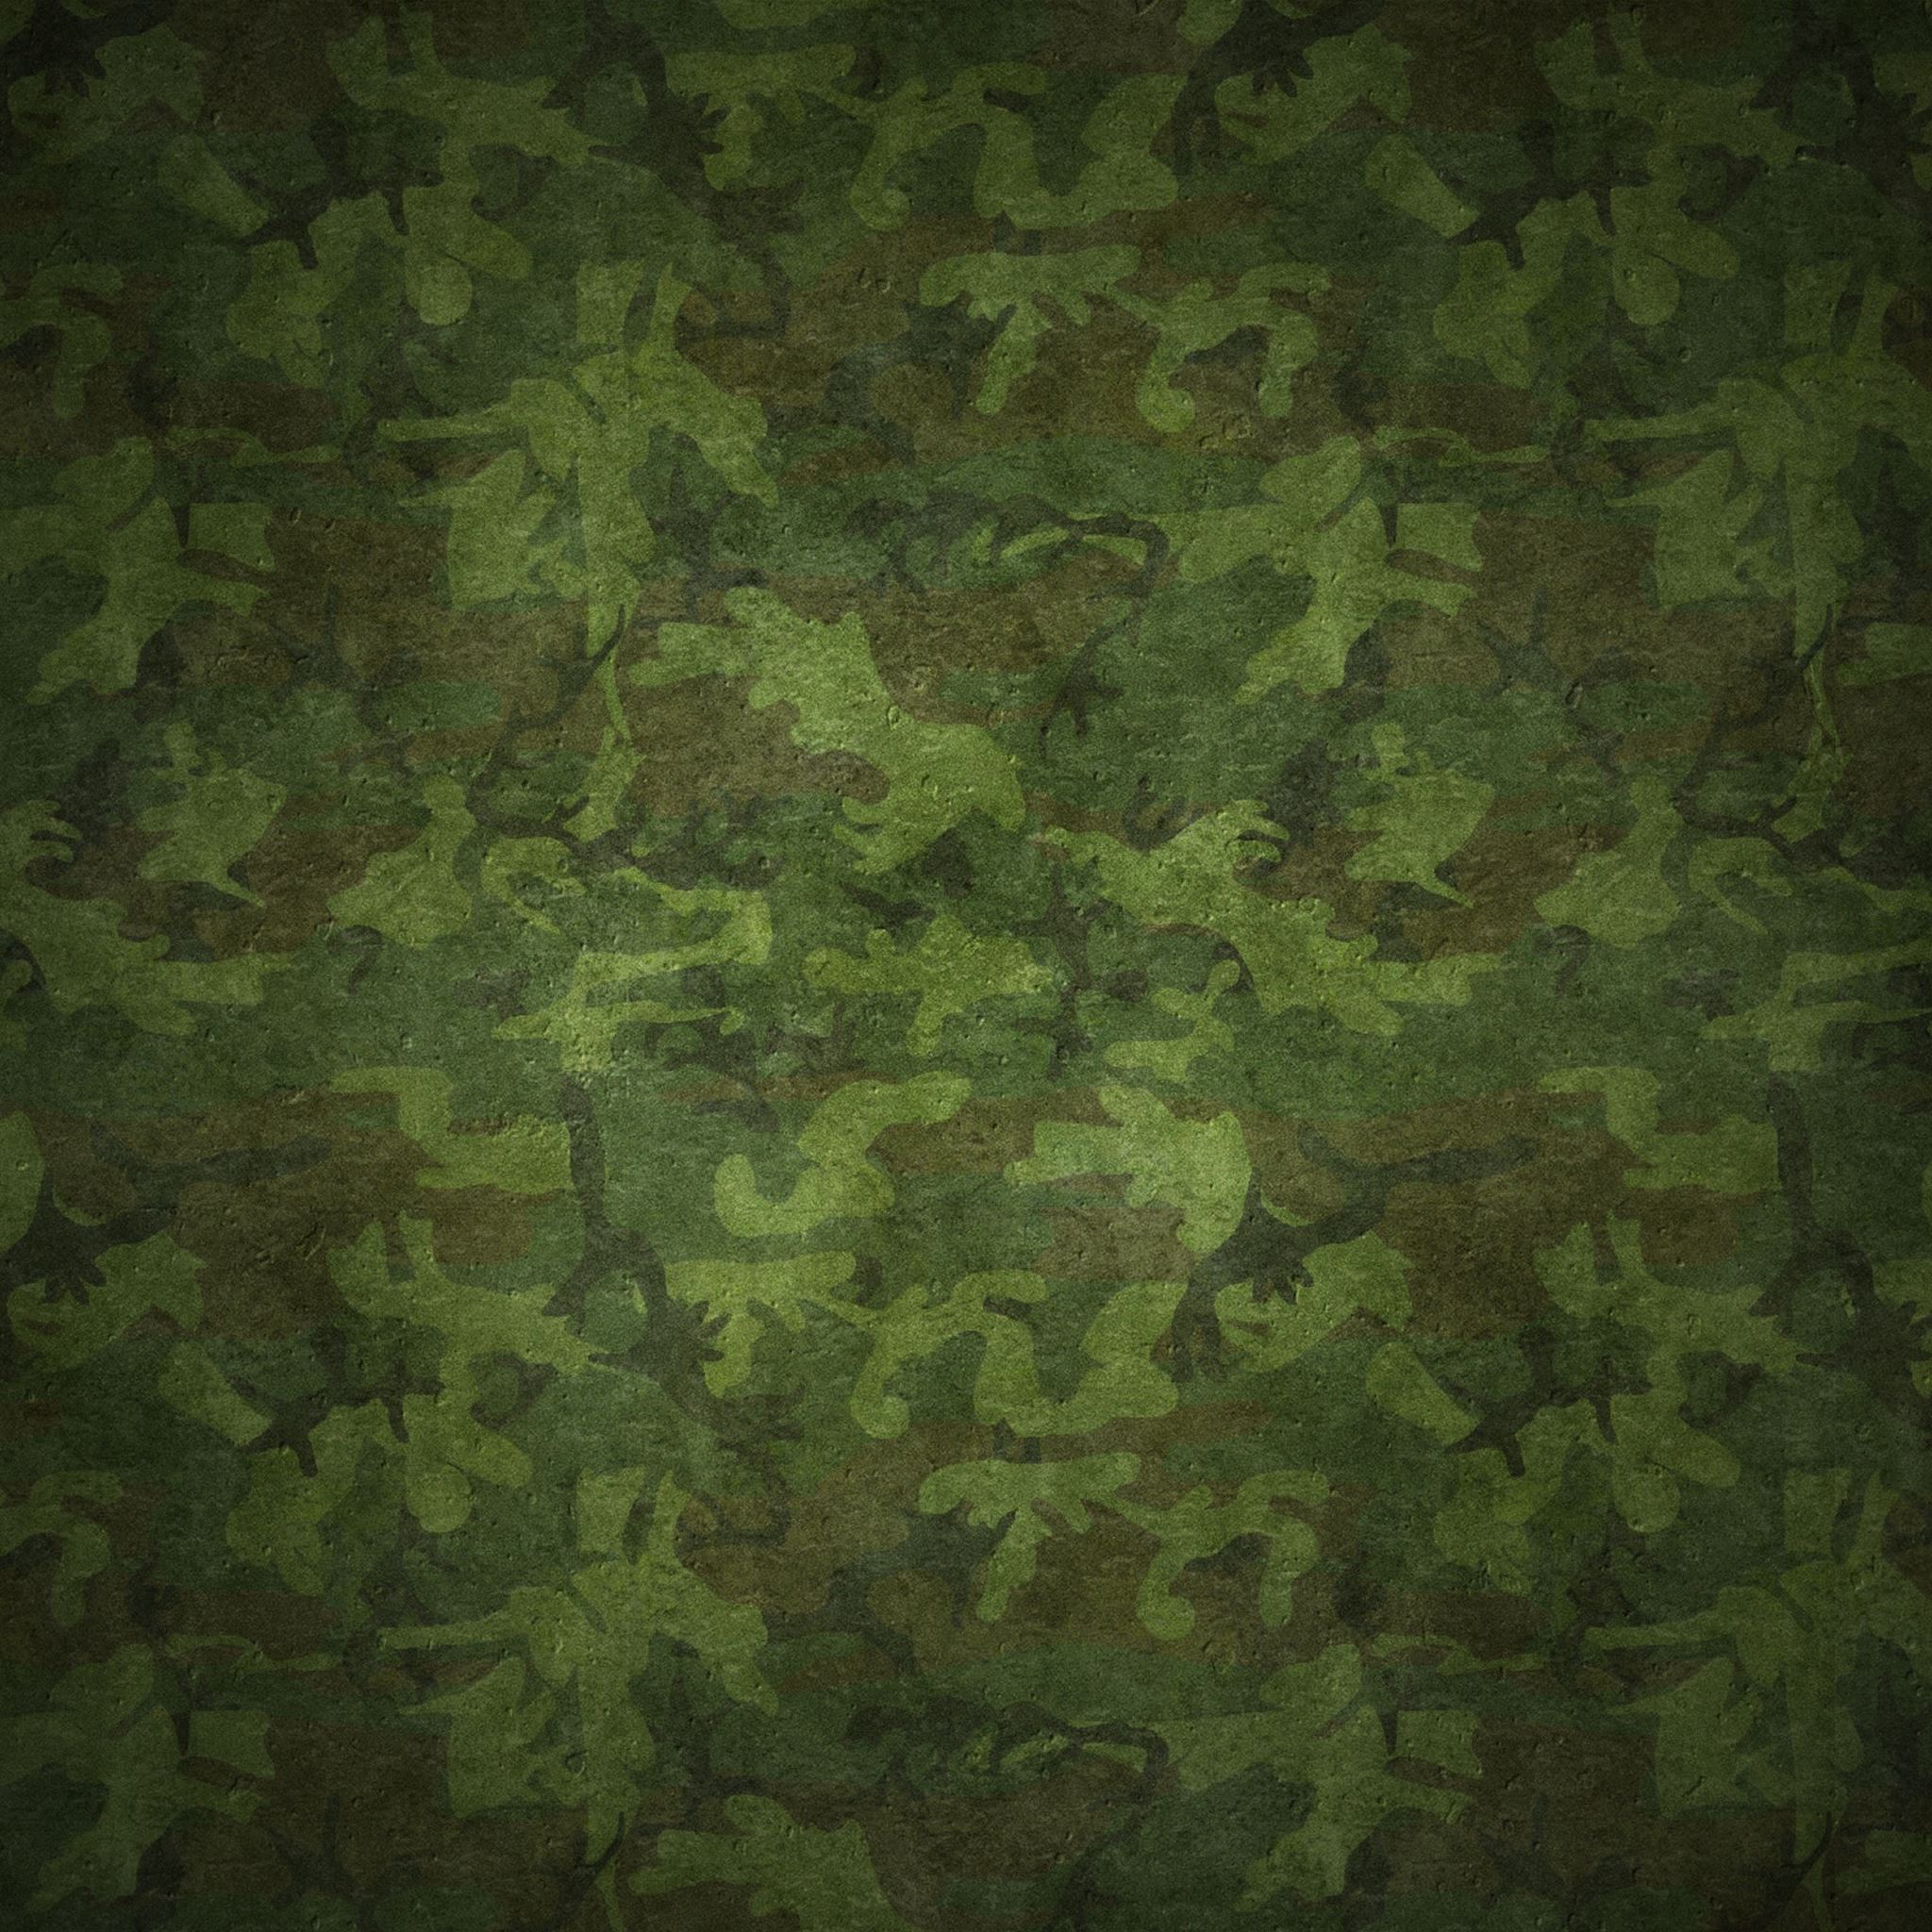 Military Camouflage Patterns iPad Air wallpaper 